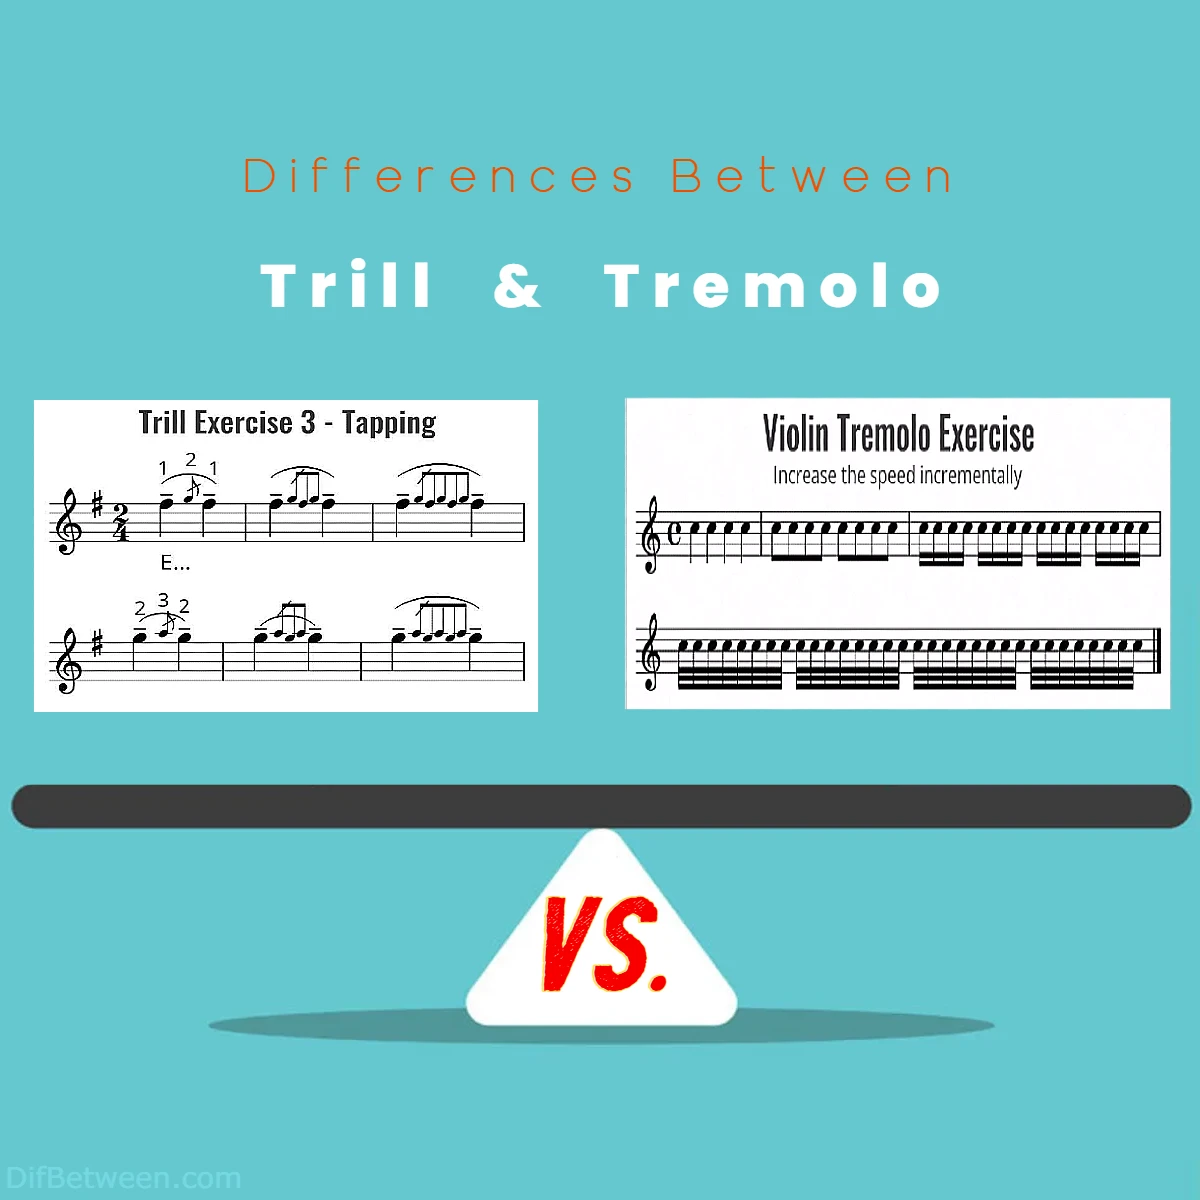 Differences Between Trill vs Tremolo